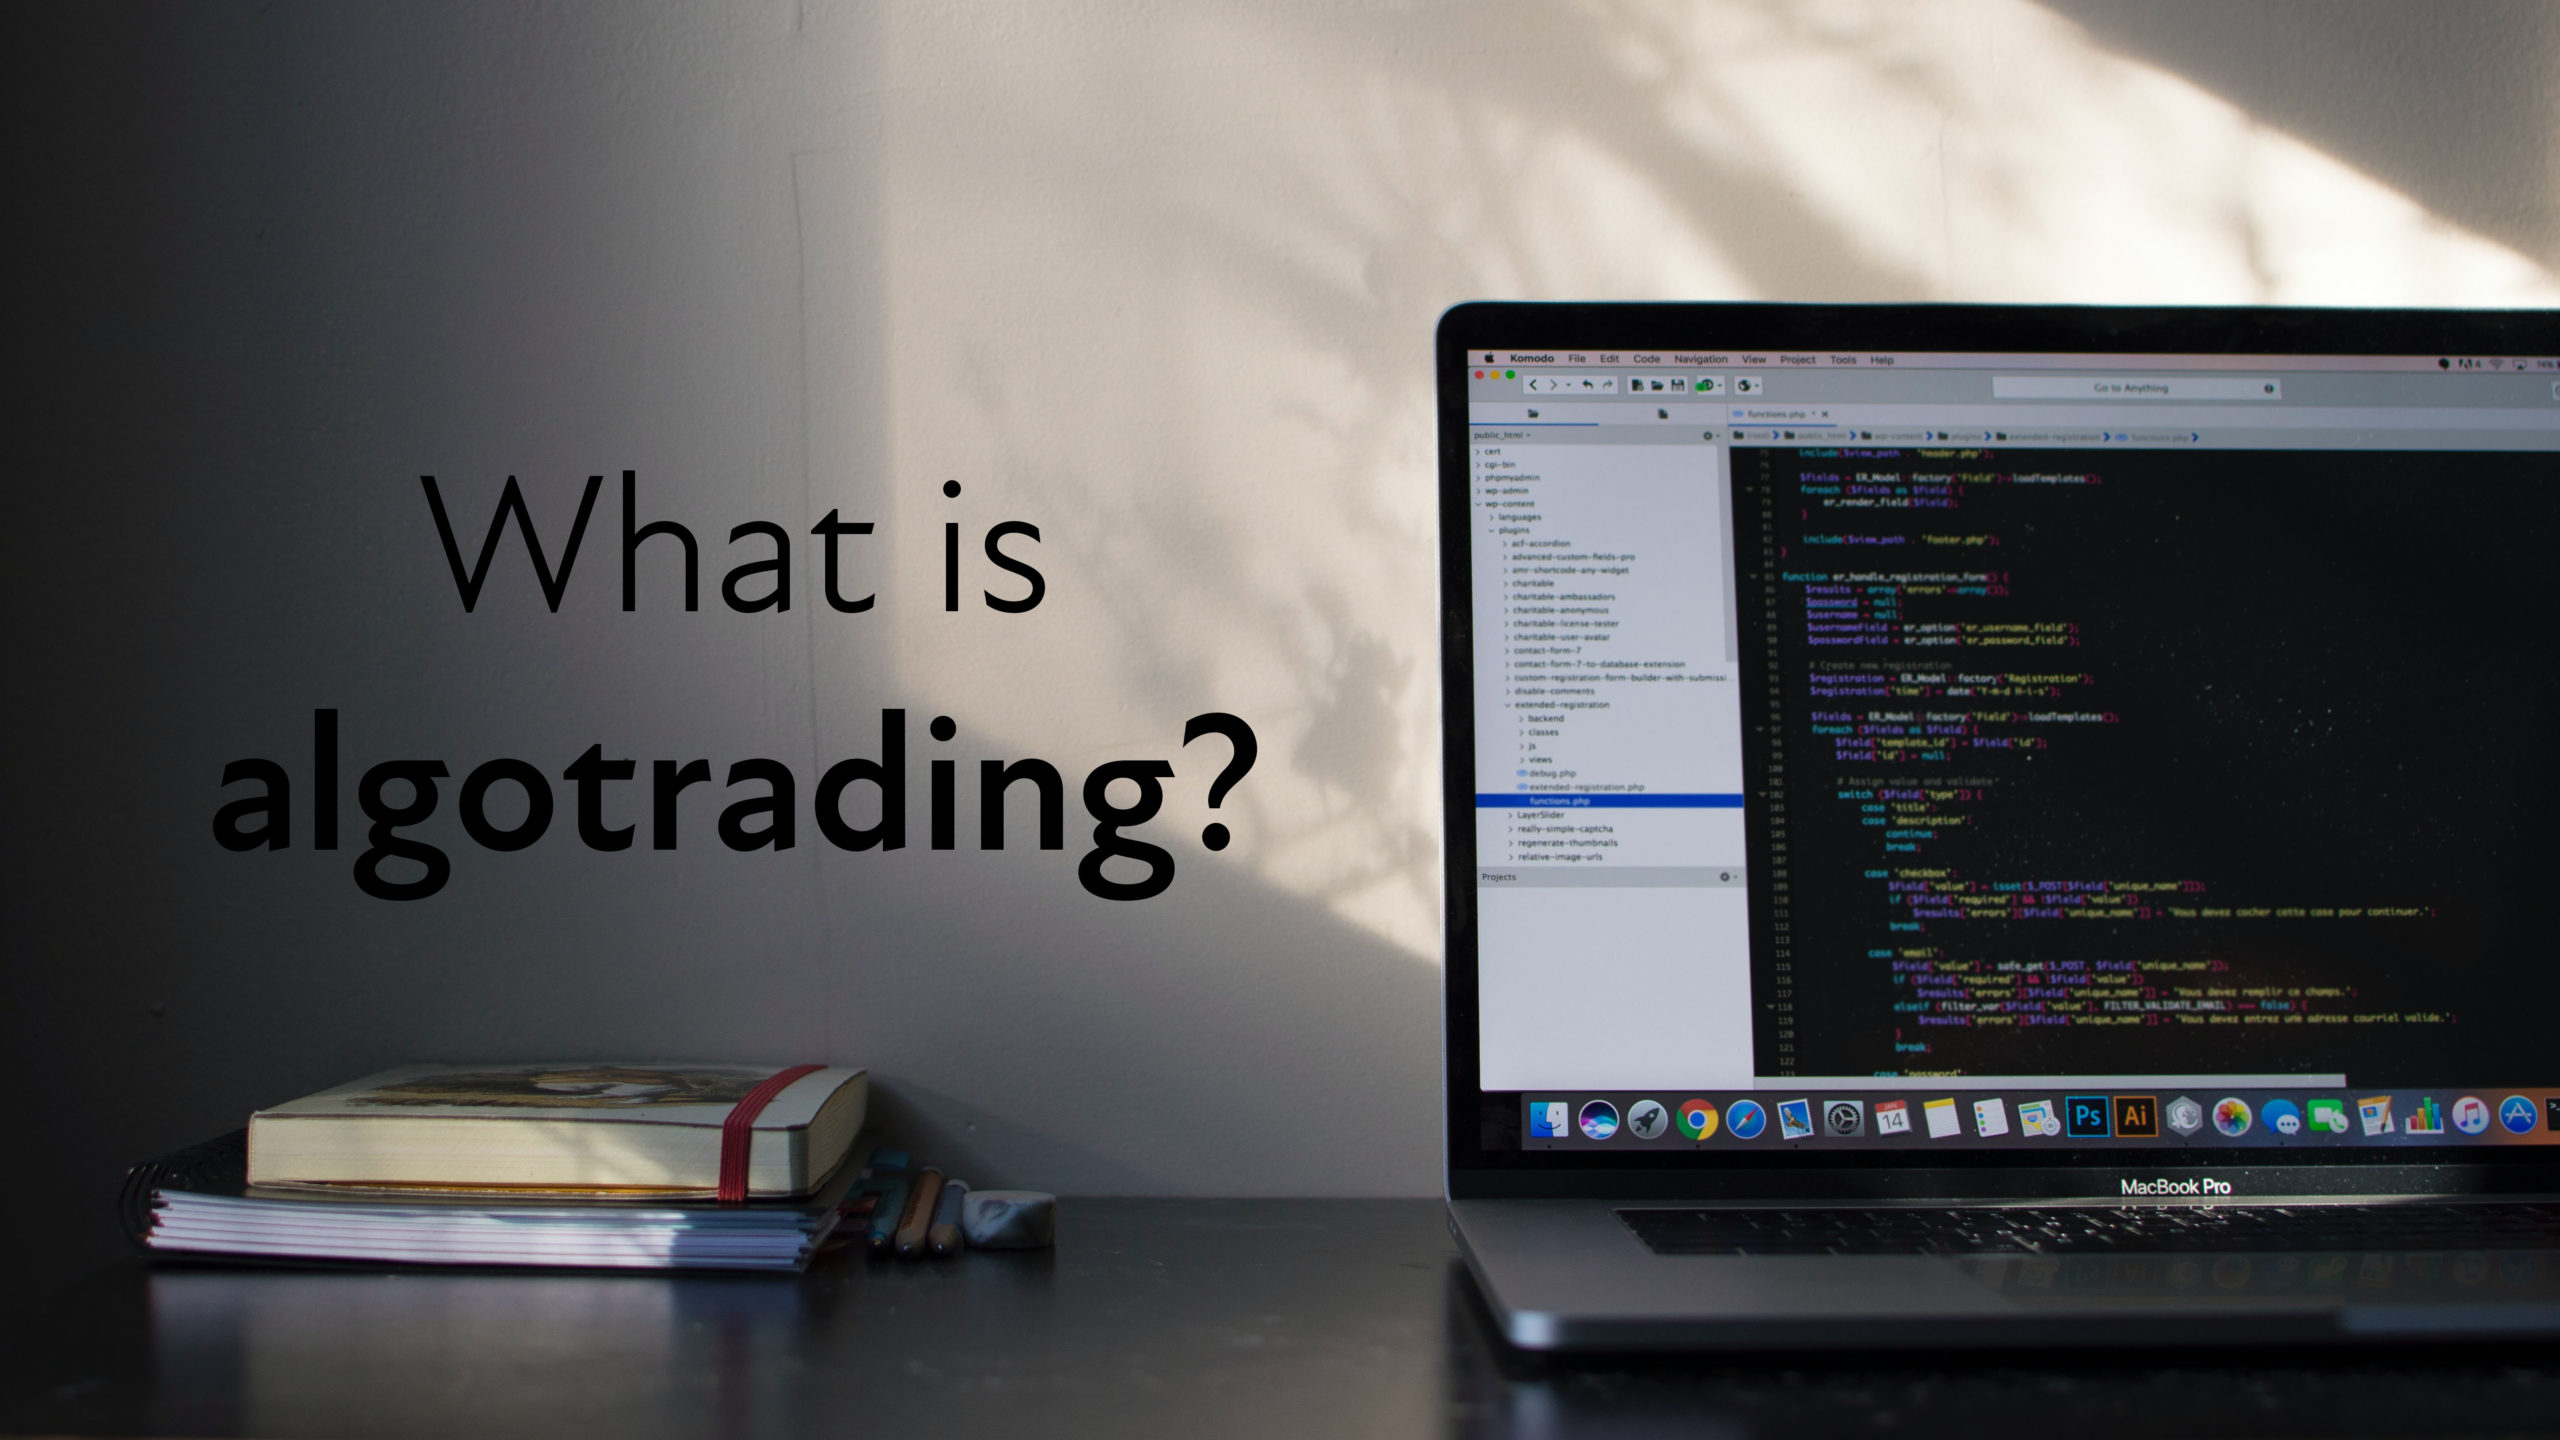 What is algotrading?